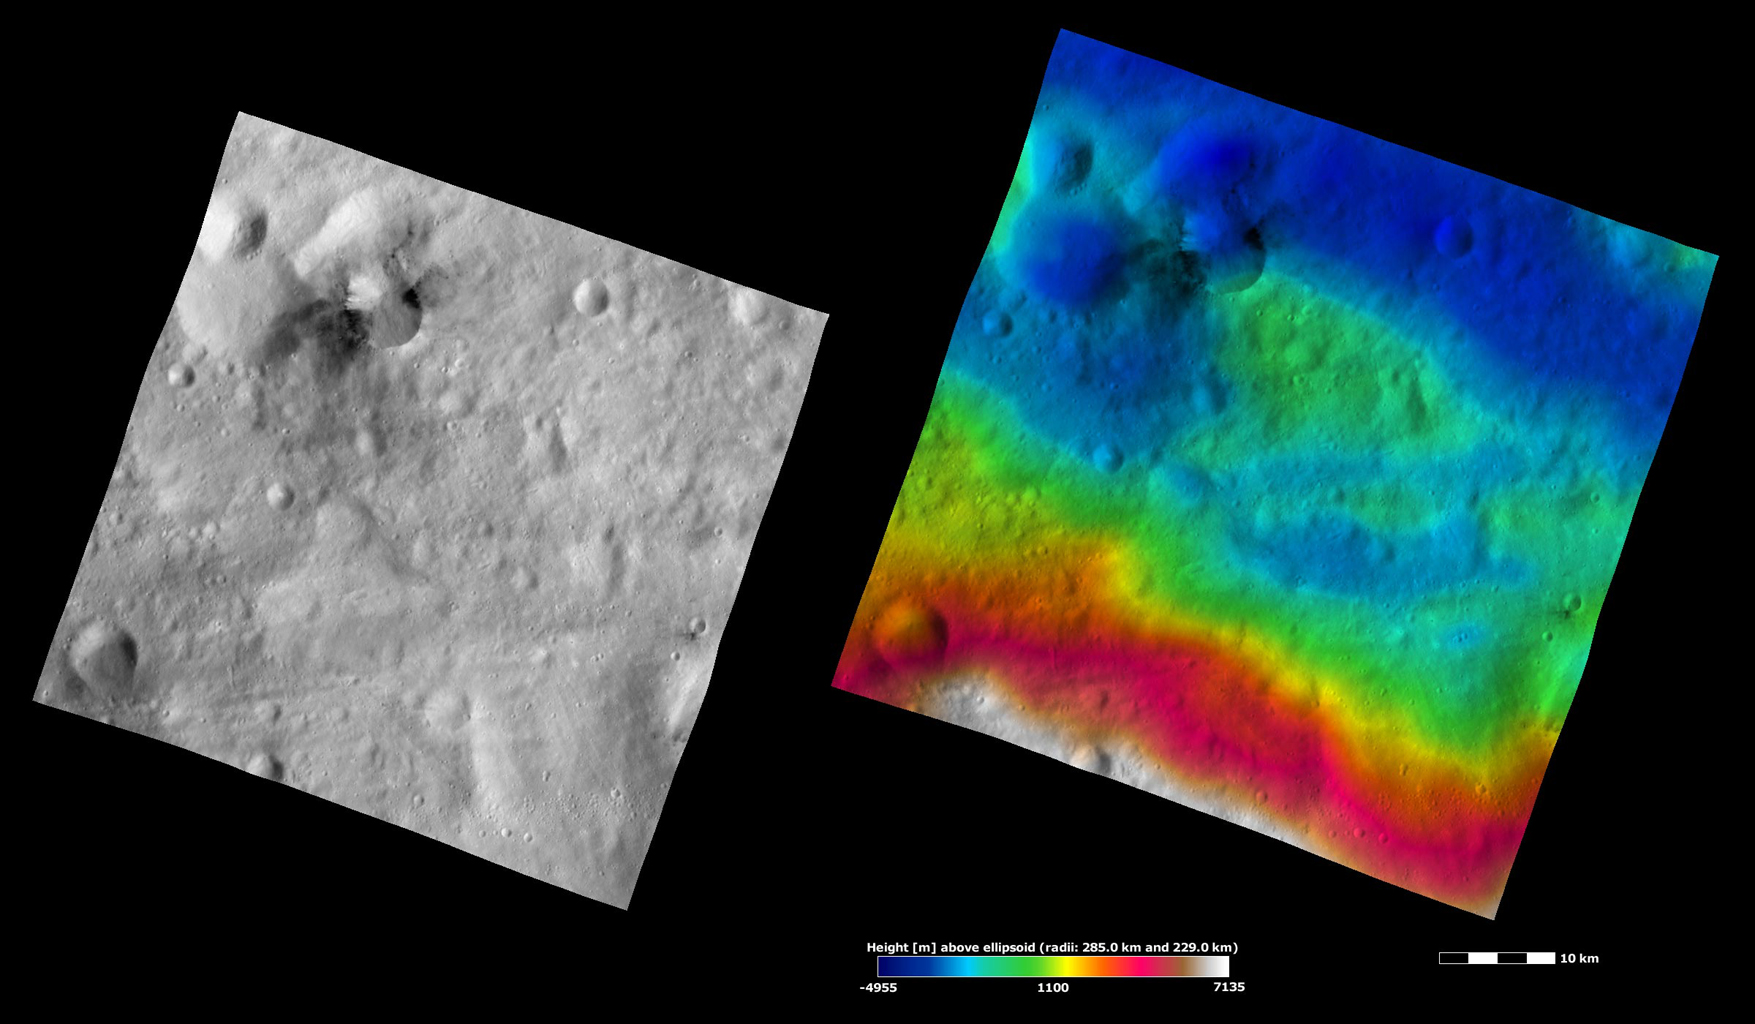 Occia Crater, Apparent Brightness and Topography Images